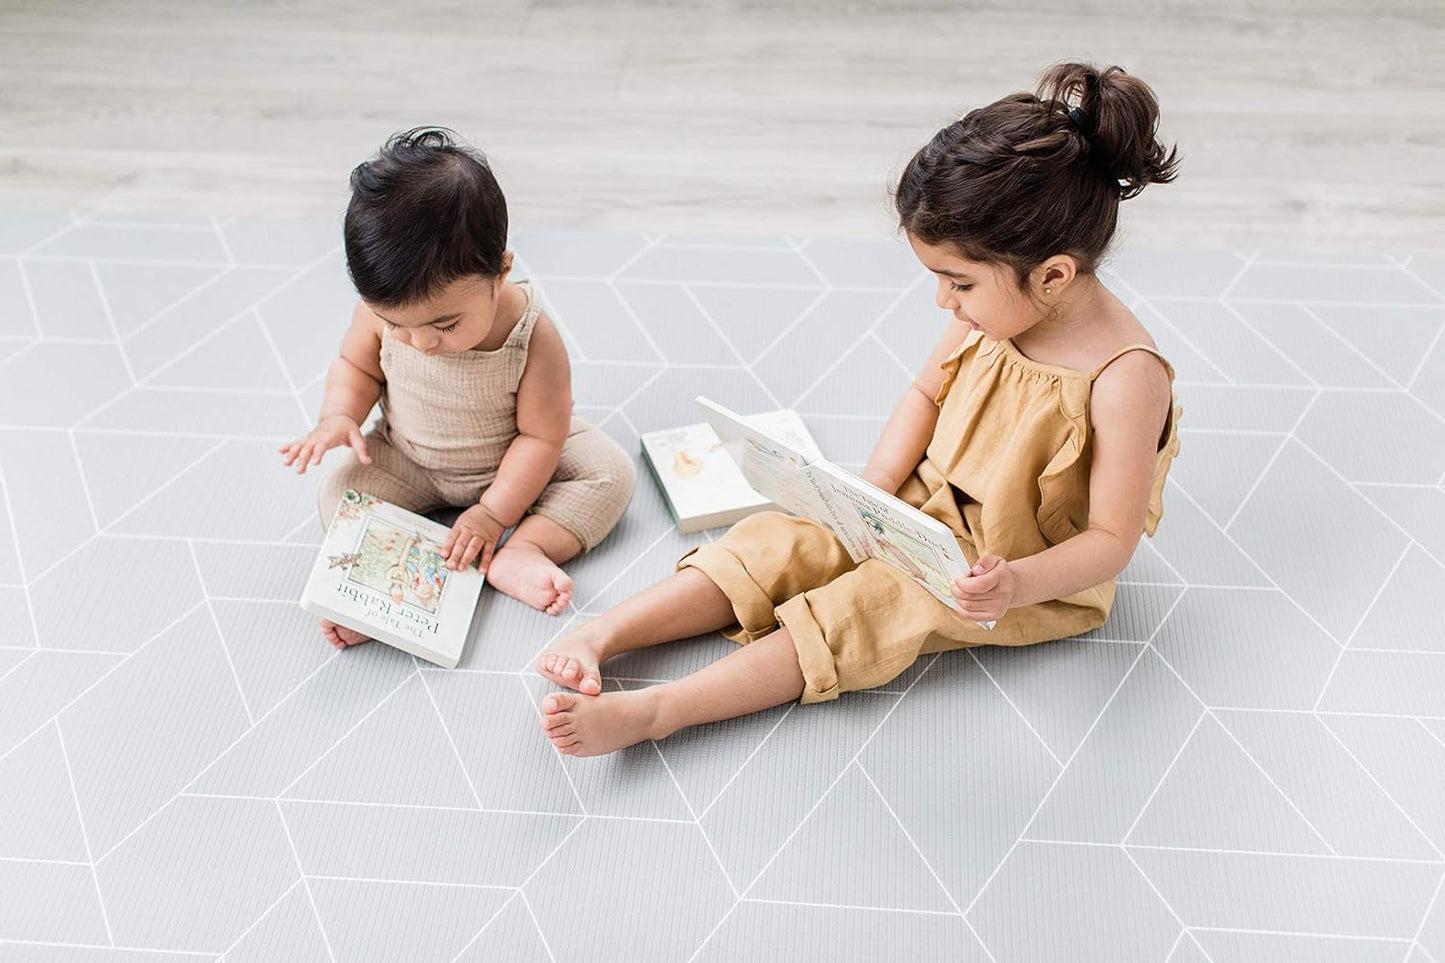 LITTLE Bot Ofie Mat, Soft Baby Play mat, Reversible Foam Floor mat, 6.5 ft x 4.5 ft, Durable and Non-Toxic (Country Road, Large)